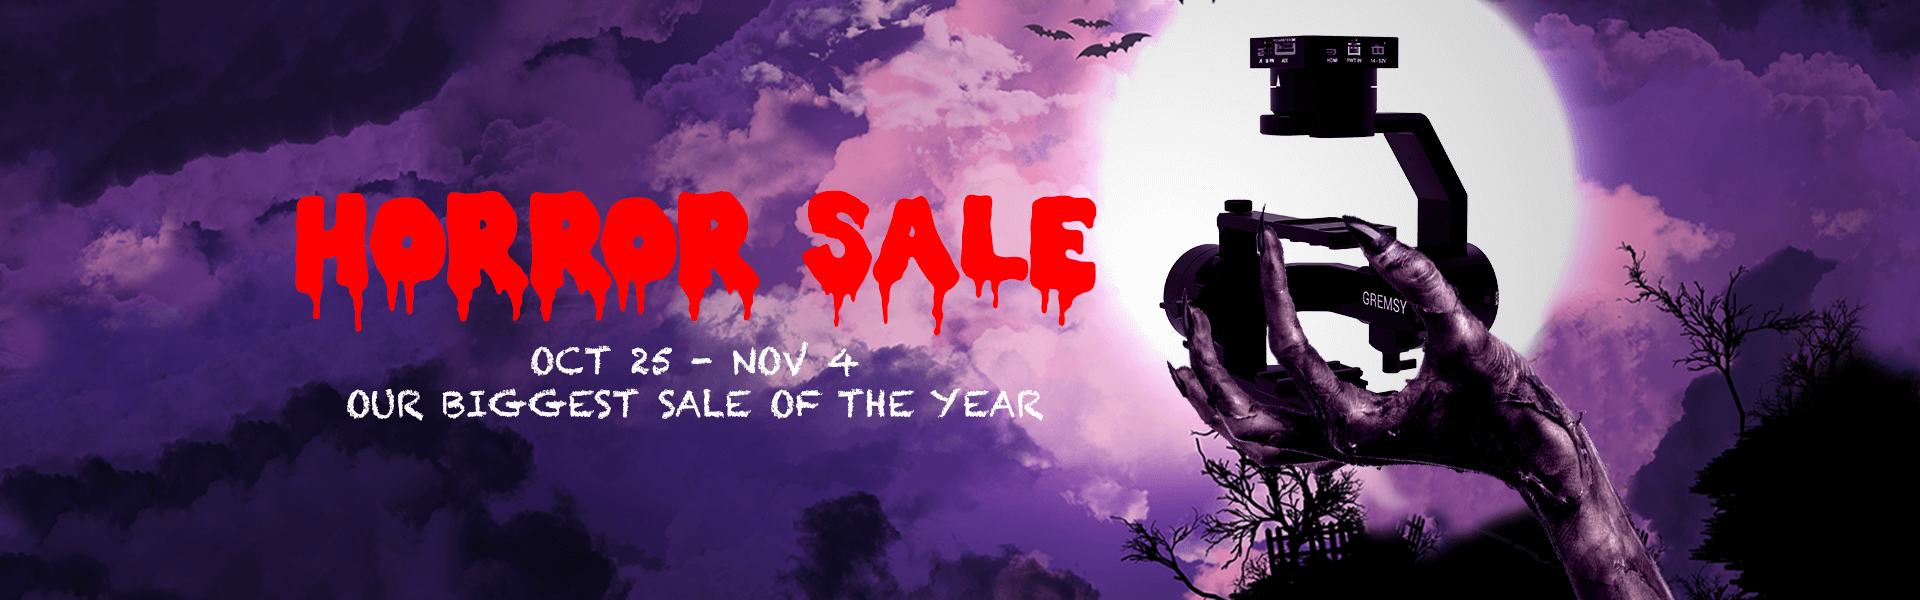 THE GREMSY'S BIGGEST SALE OF THE YEAR - HORROR SALE